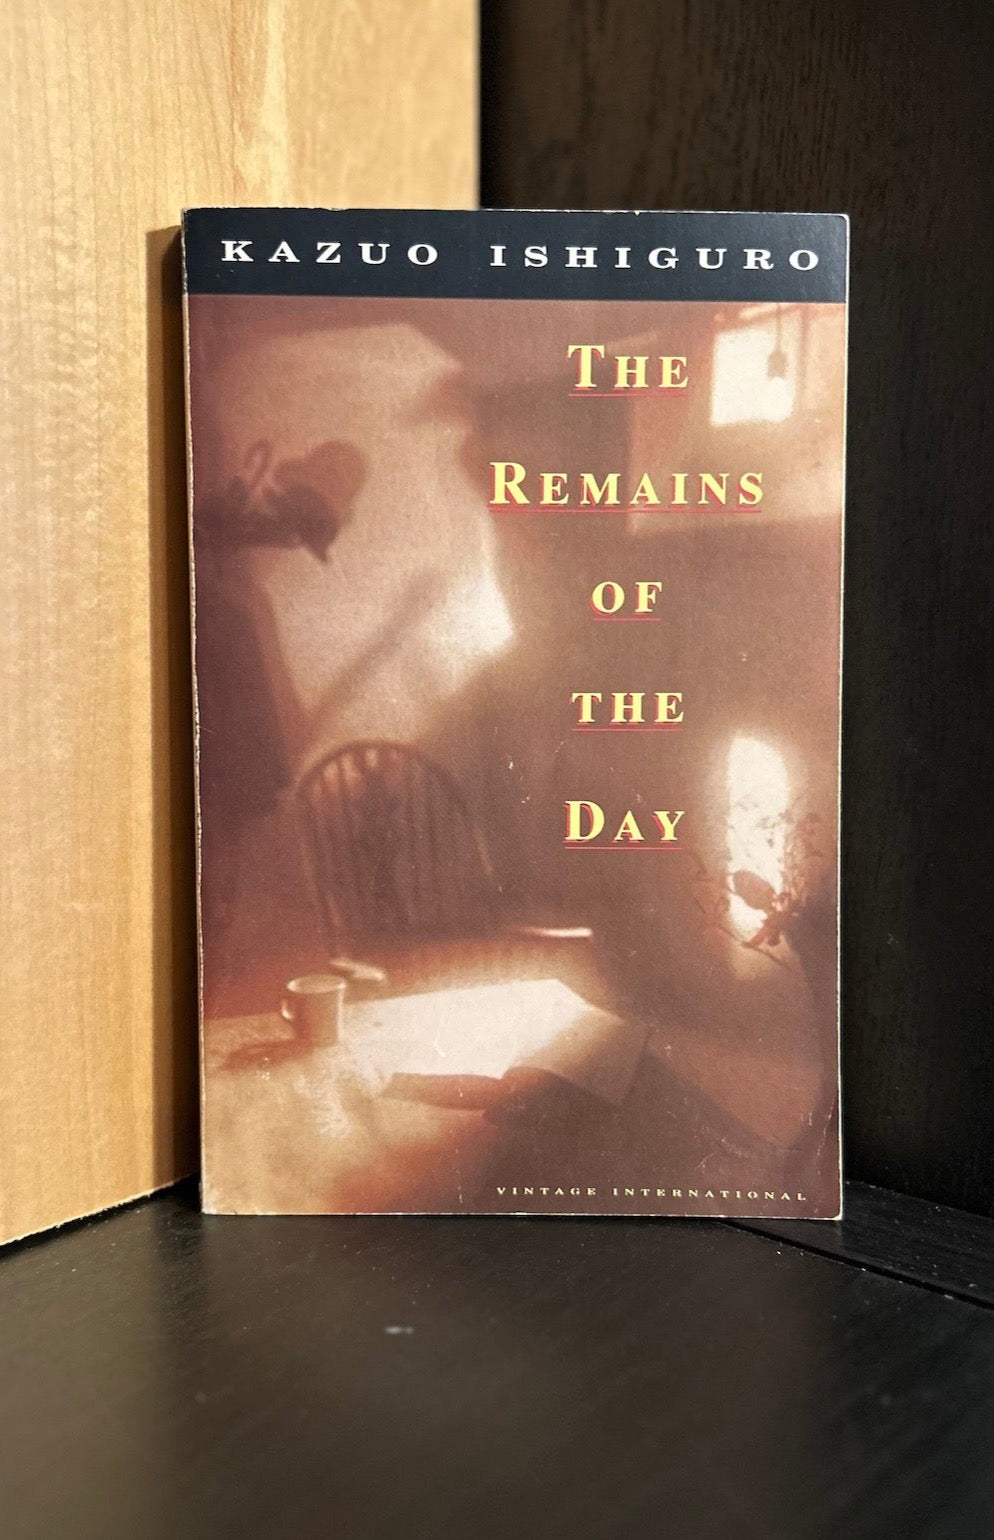 The Remains of the Day - Kazuo Ishiguro - sepia